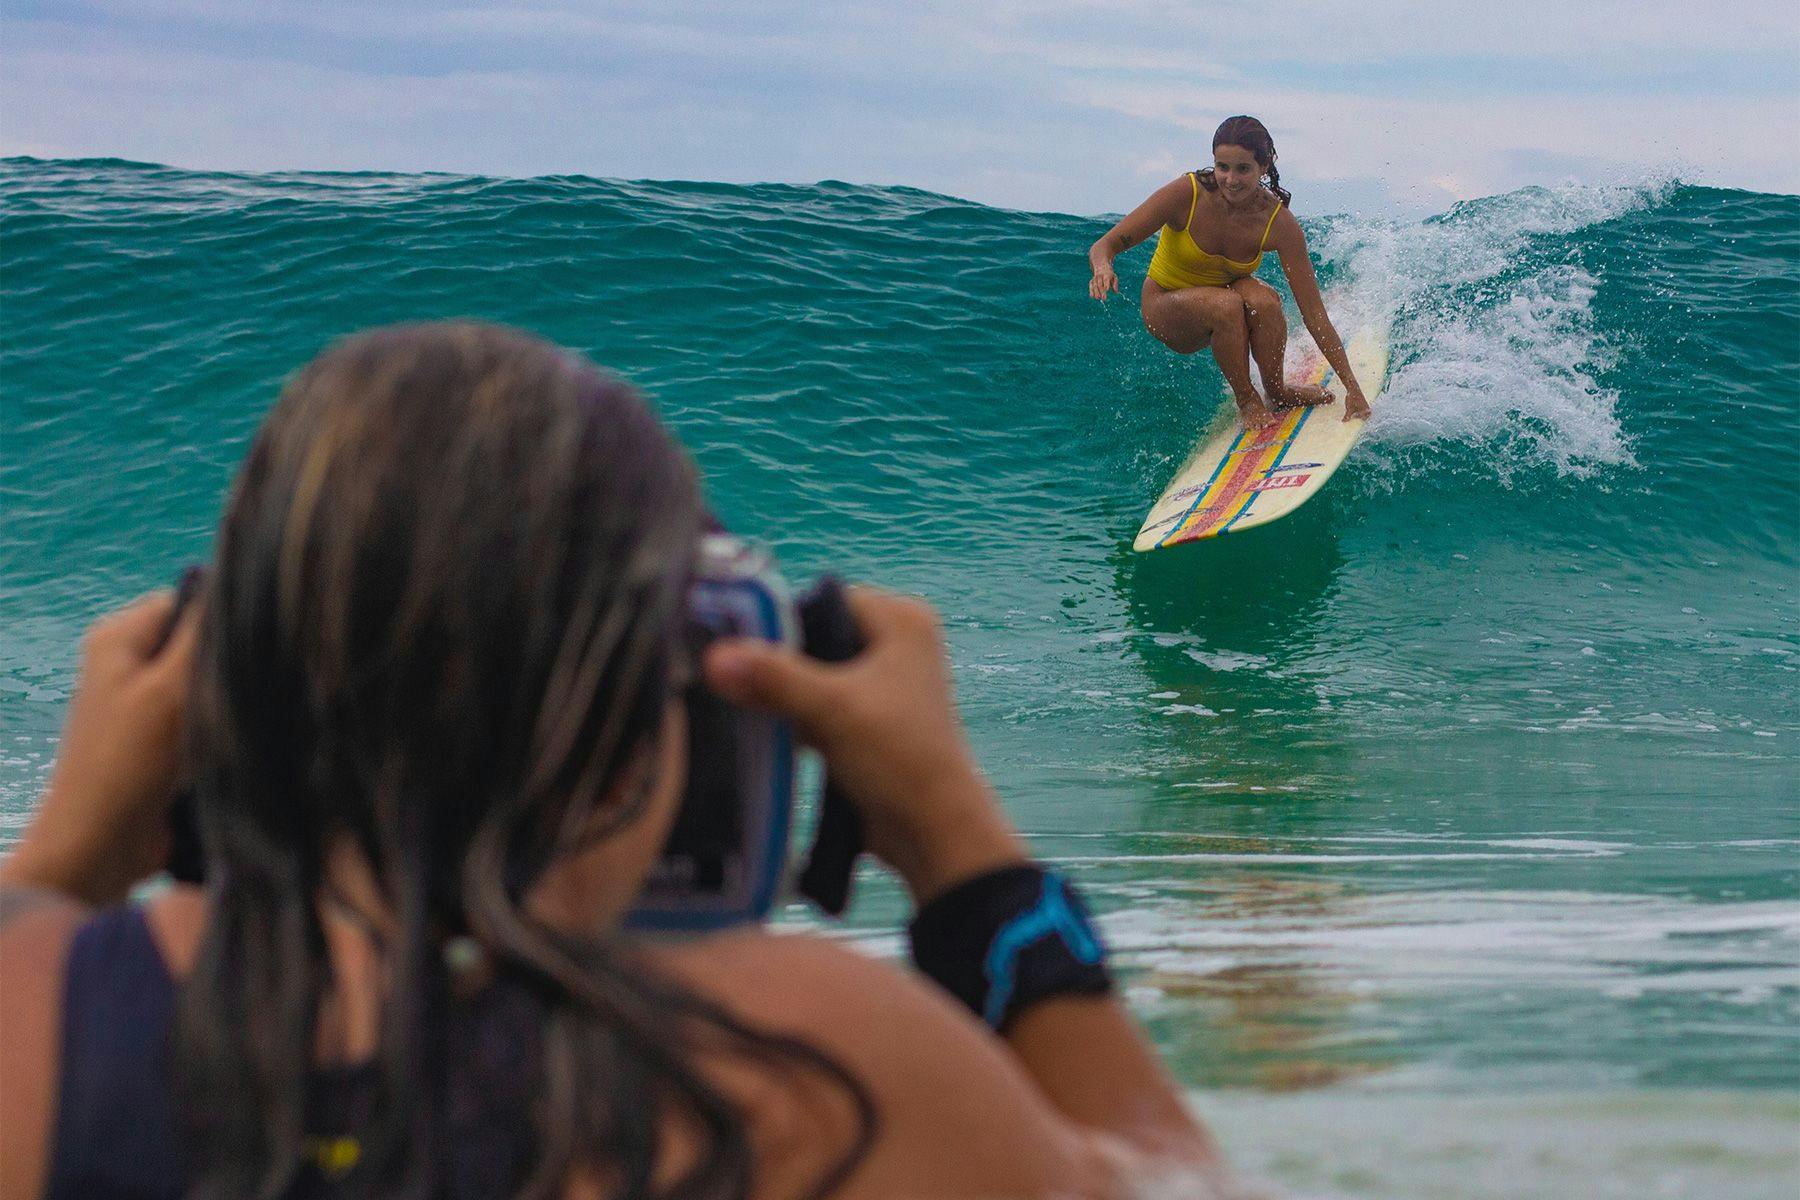 surf photographer ana catarina shooting a female longboarder in the surf